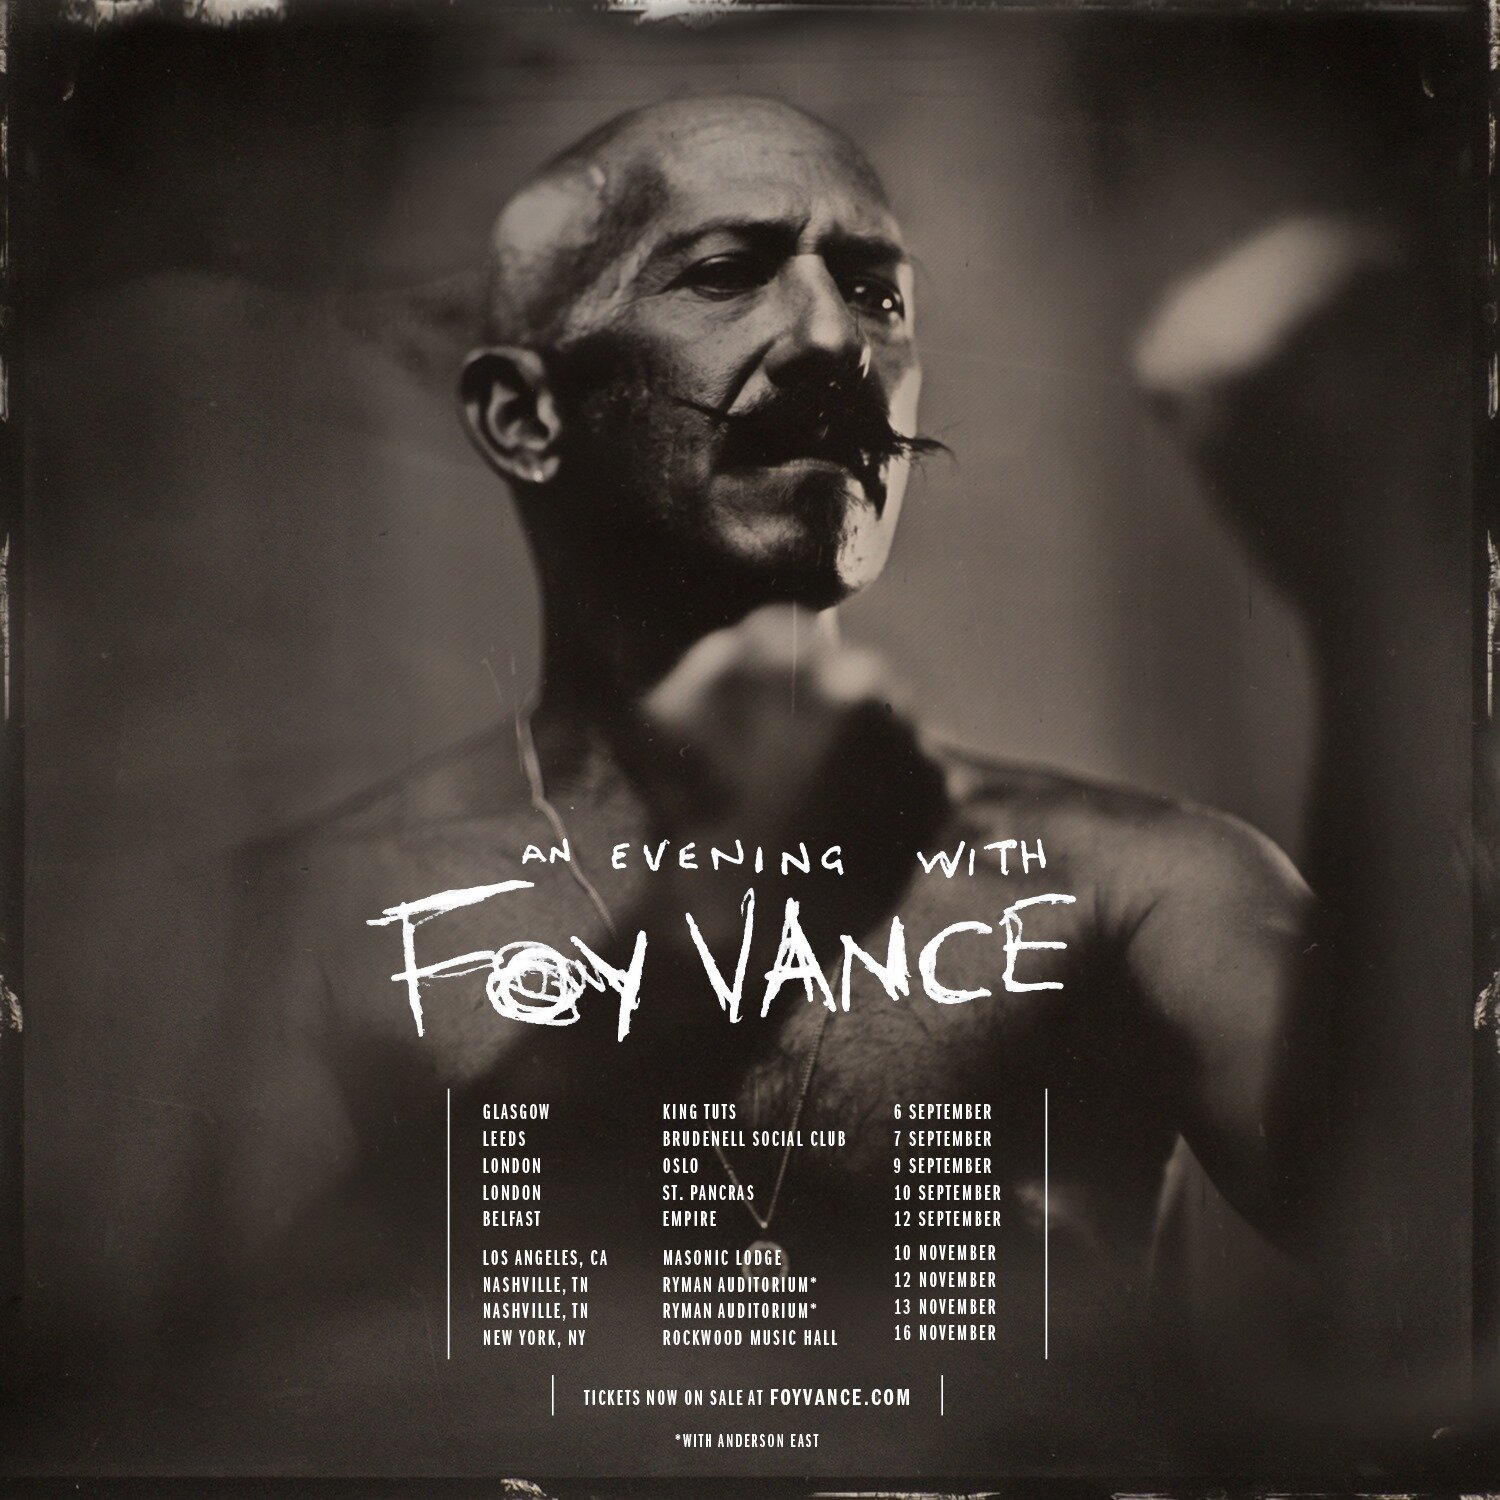 An evening with Foy Vance